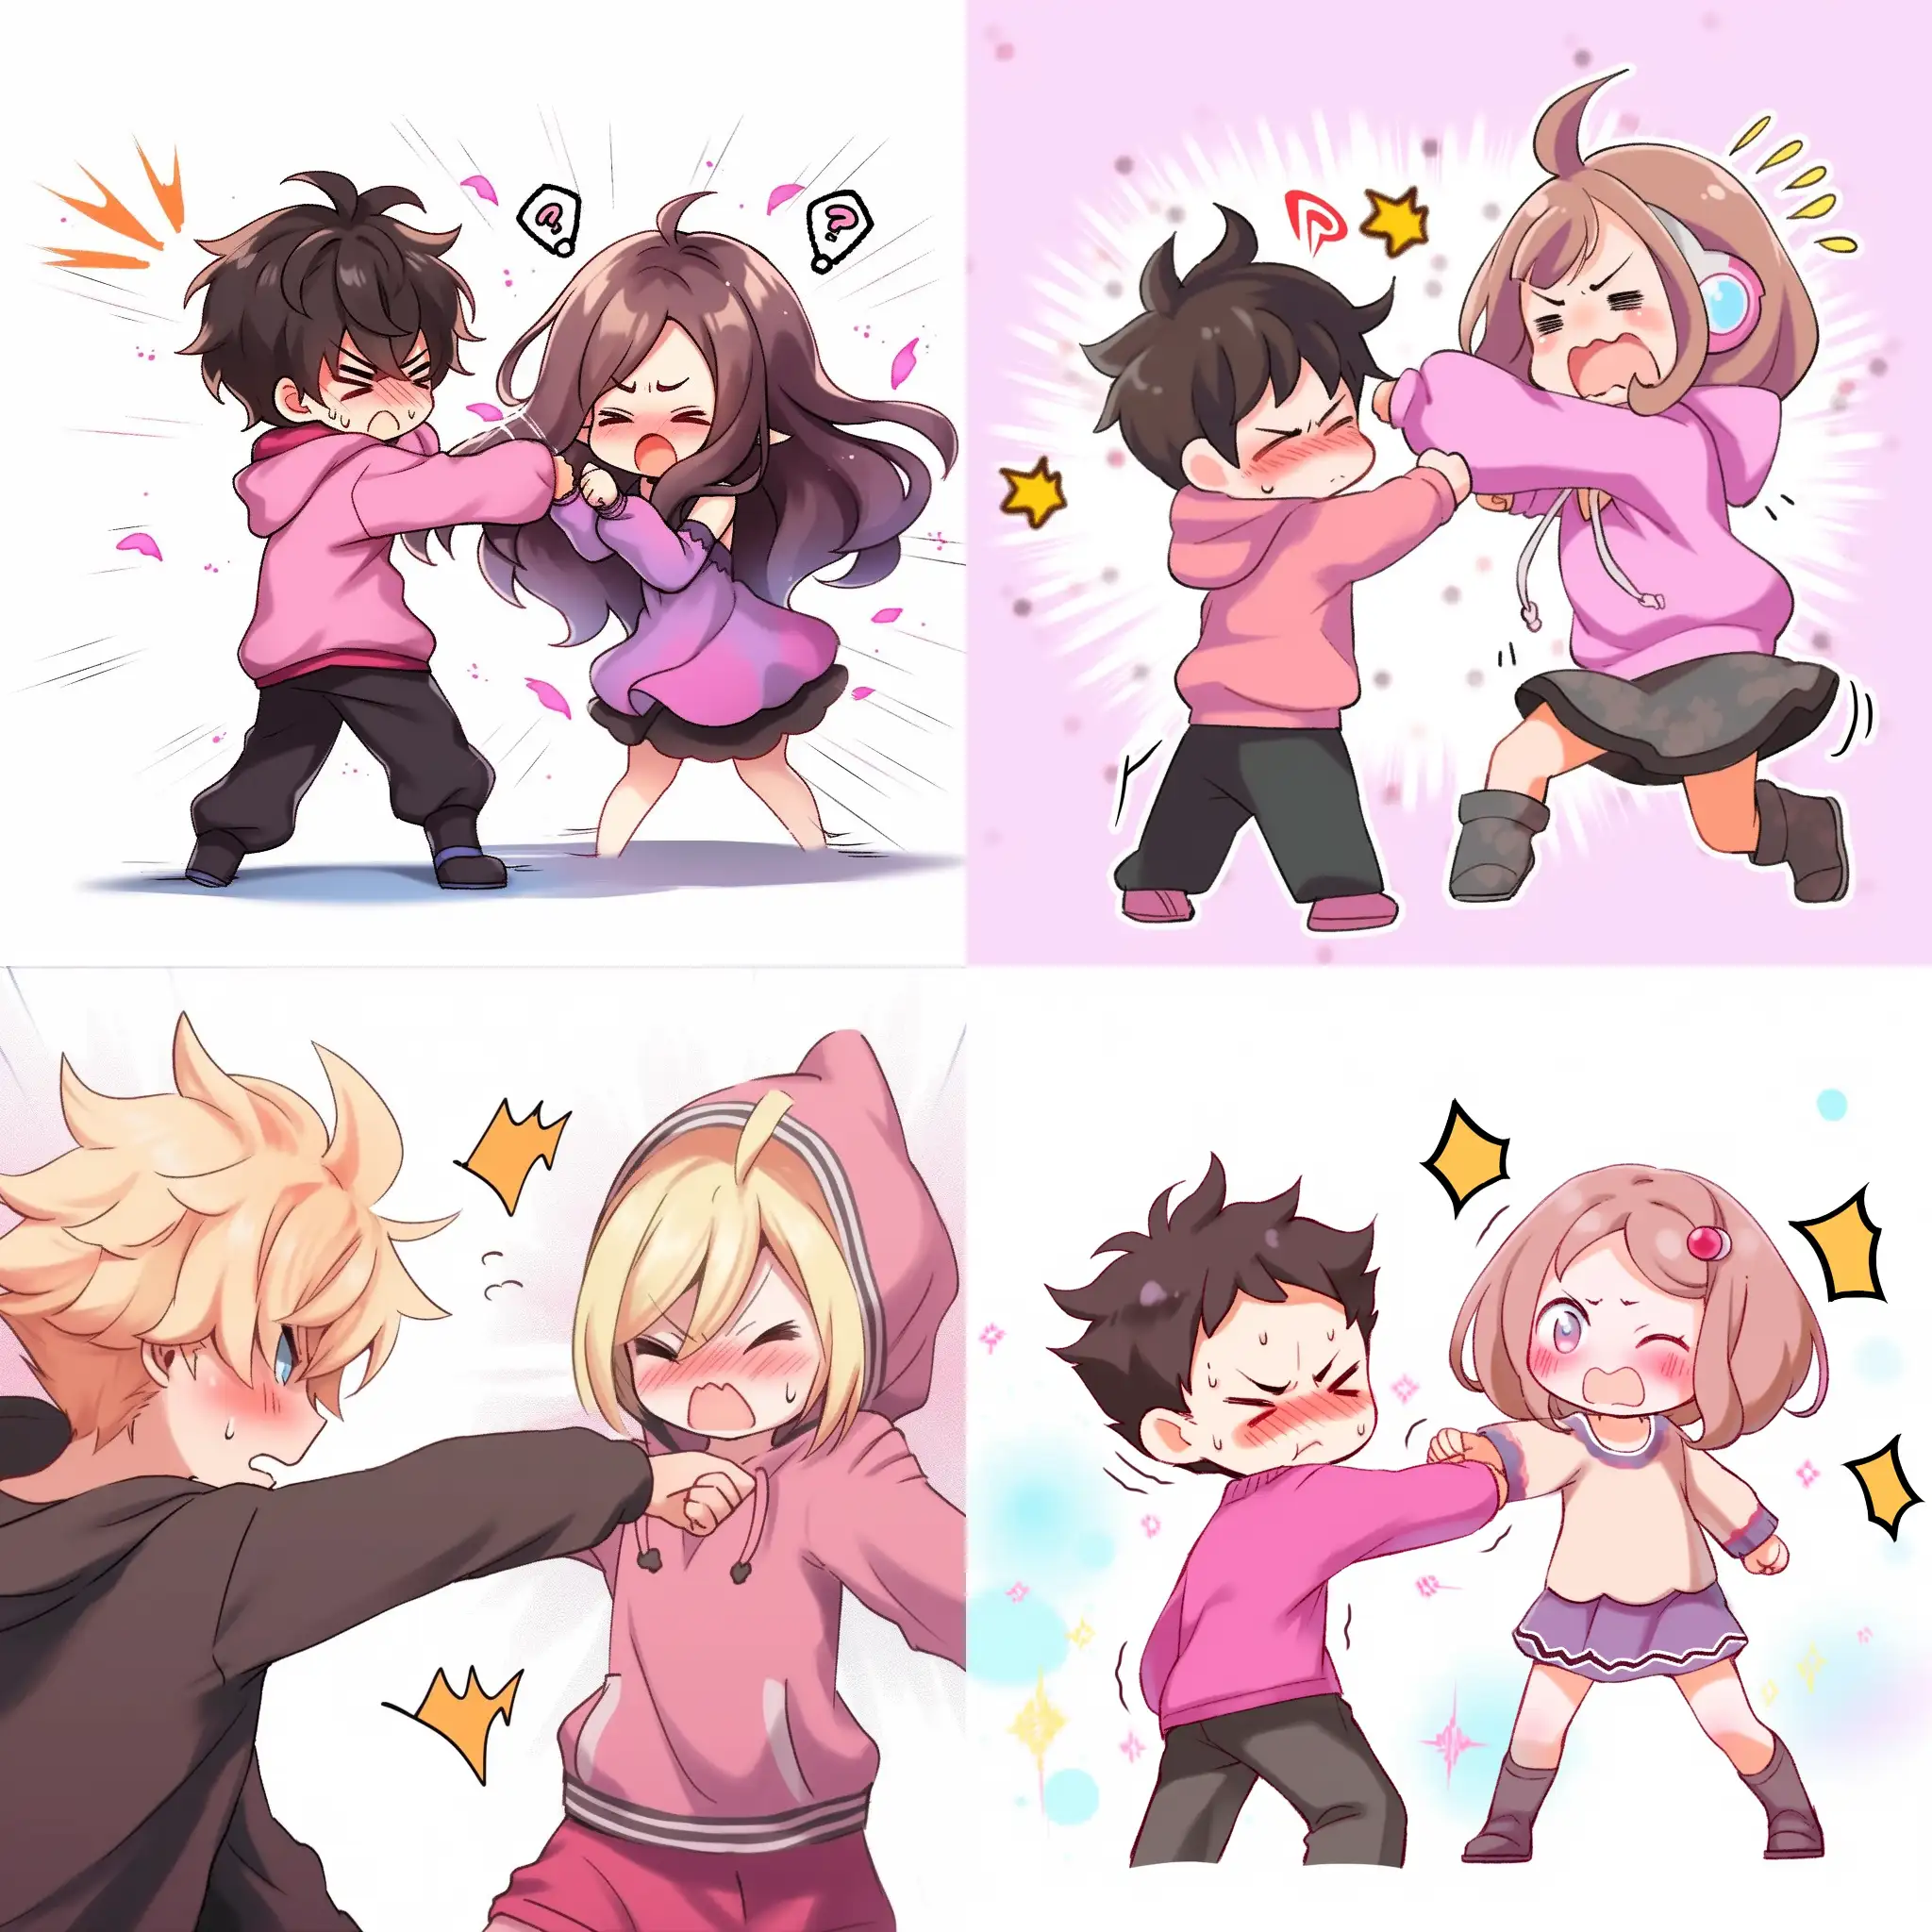 Chibi-Girl-Playfully-Slapping-Boys-Face-with-Motion-Blur